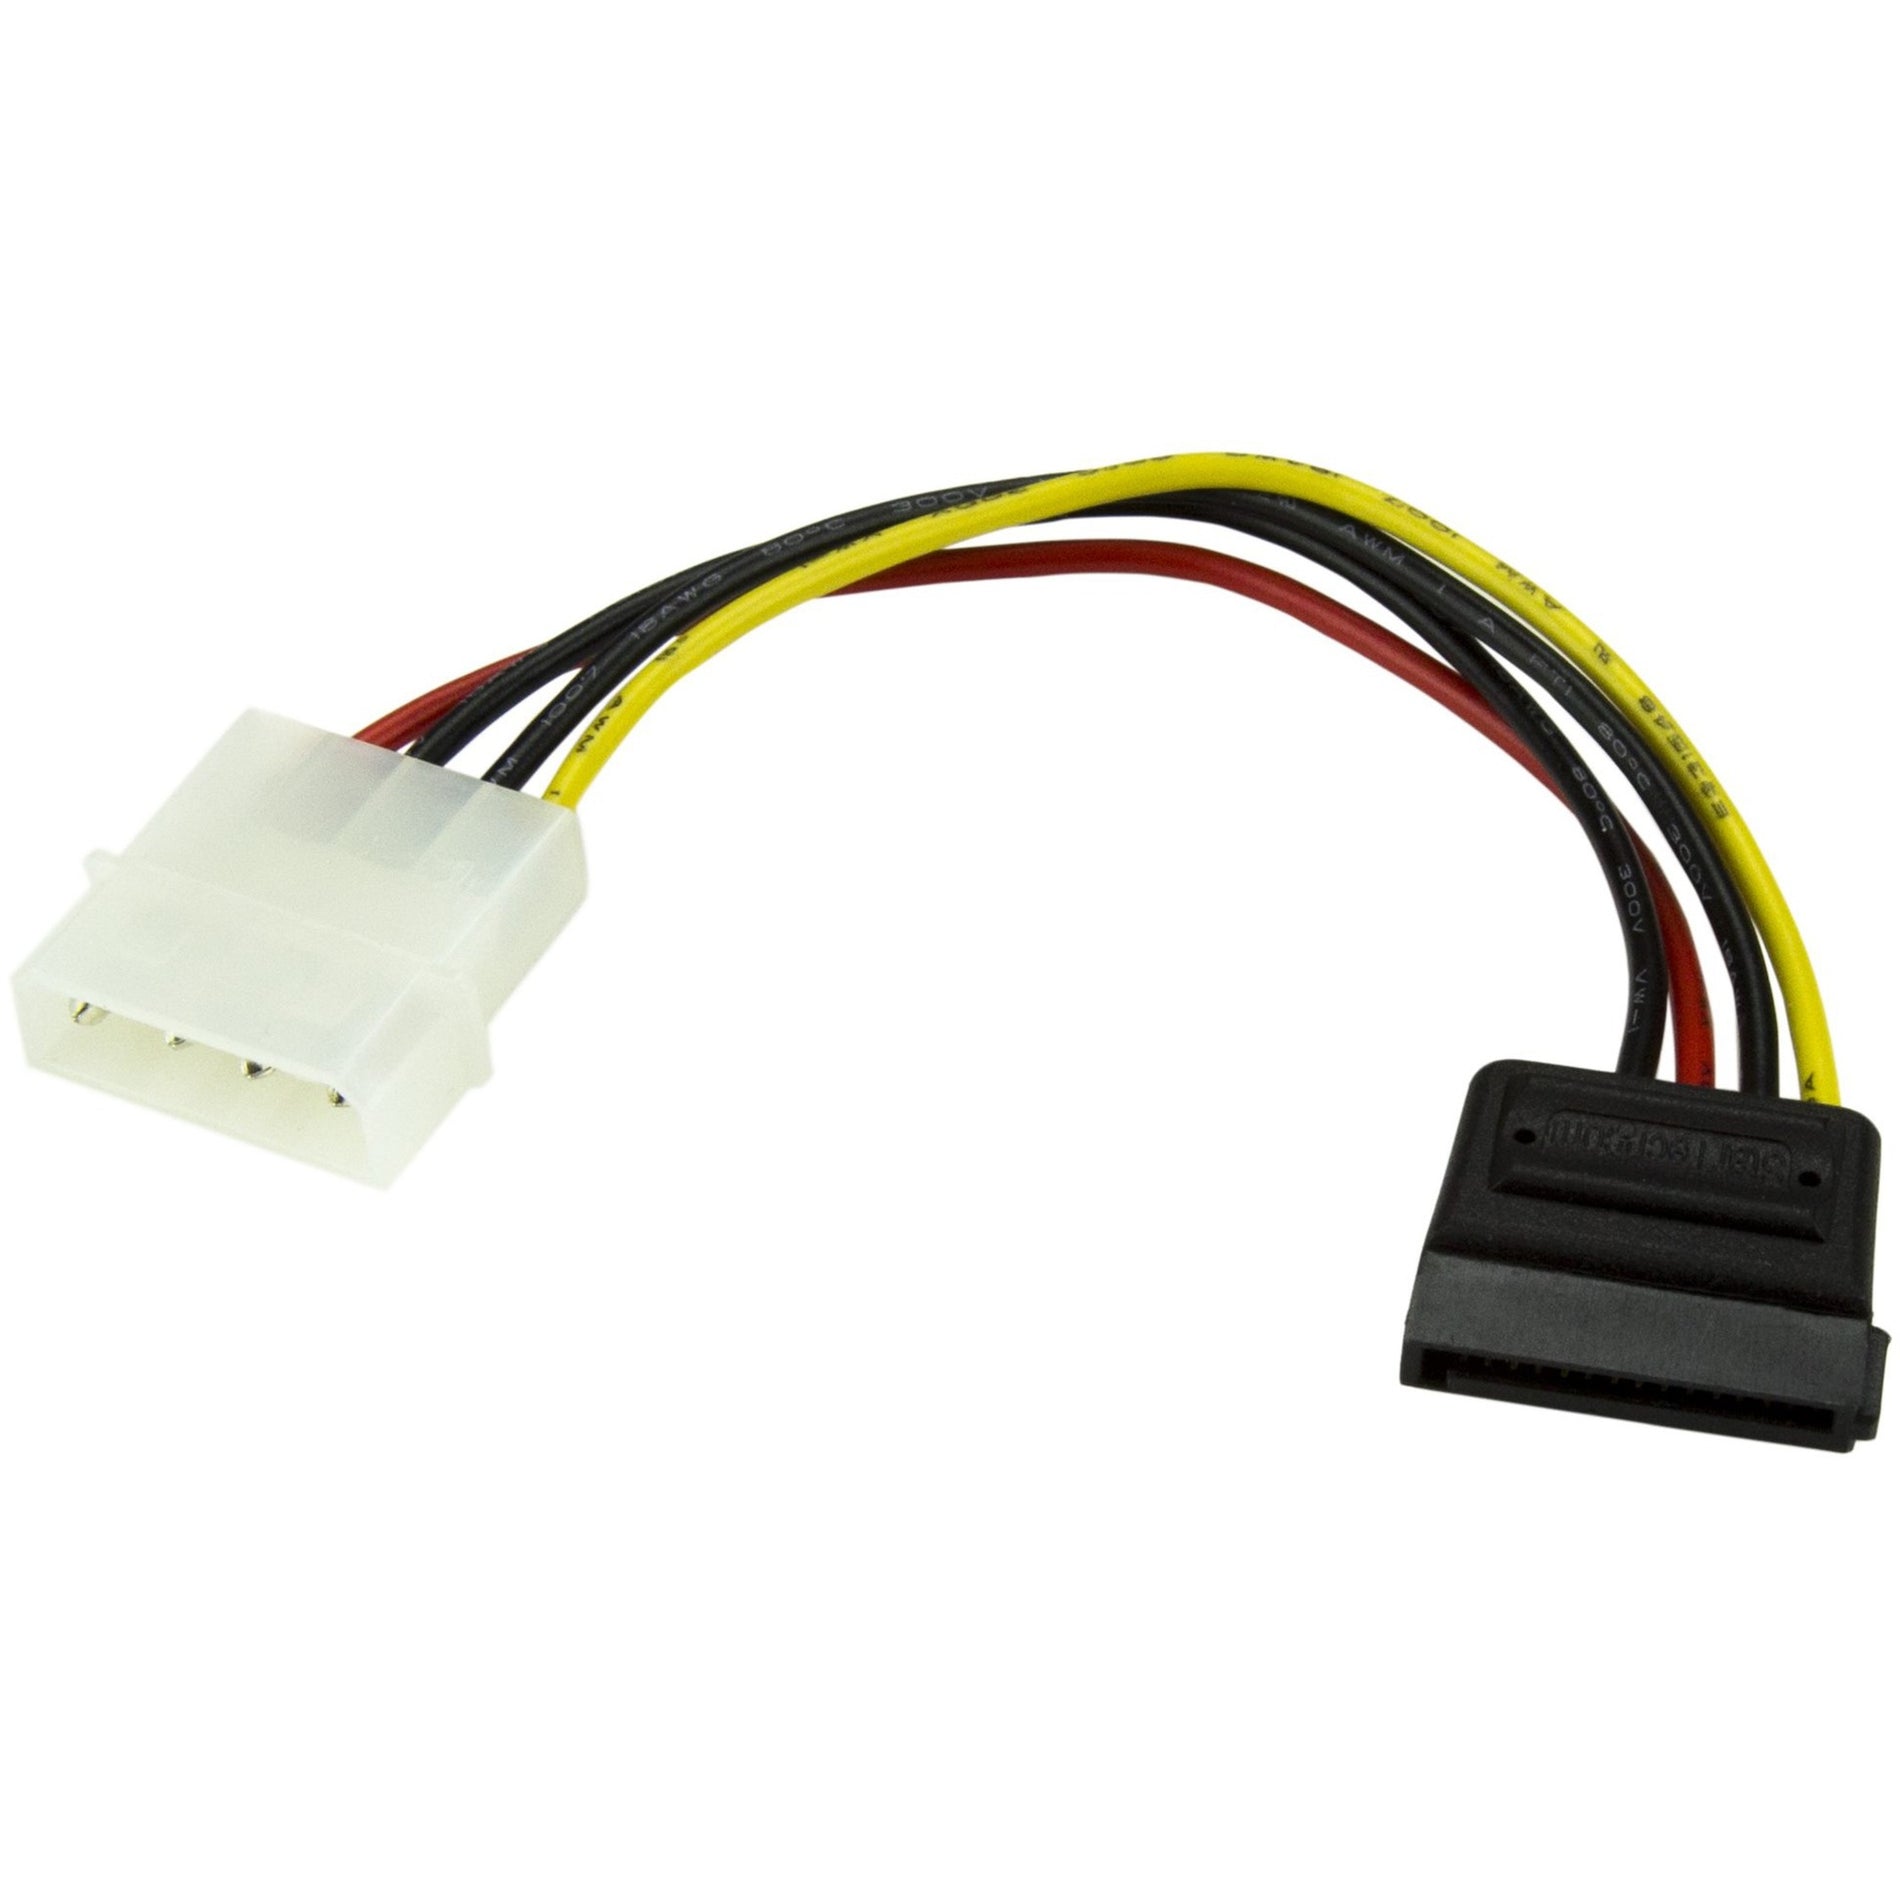 StarTech.com SATAPOWADAP 6in 4 Pin Molex to SATA Power Cable Adapter Connect Your Hard Drive Effortlessly StarTech.com SATAPOWADAP 6in 4 Pin Molex to SATA Power Cable Adapter Connect Your Hard Drive Effortlessly